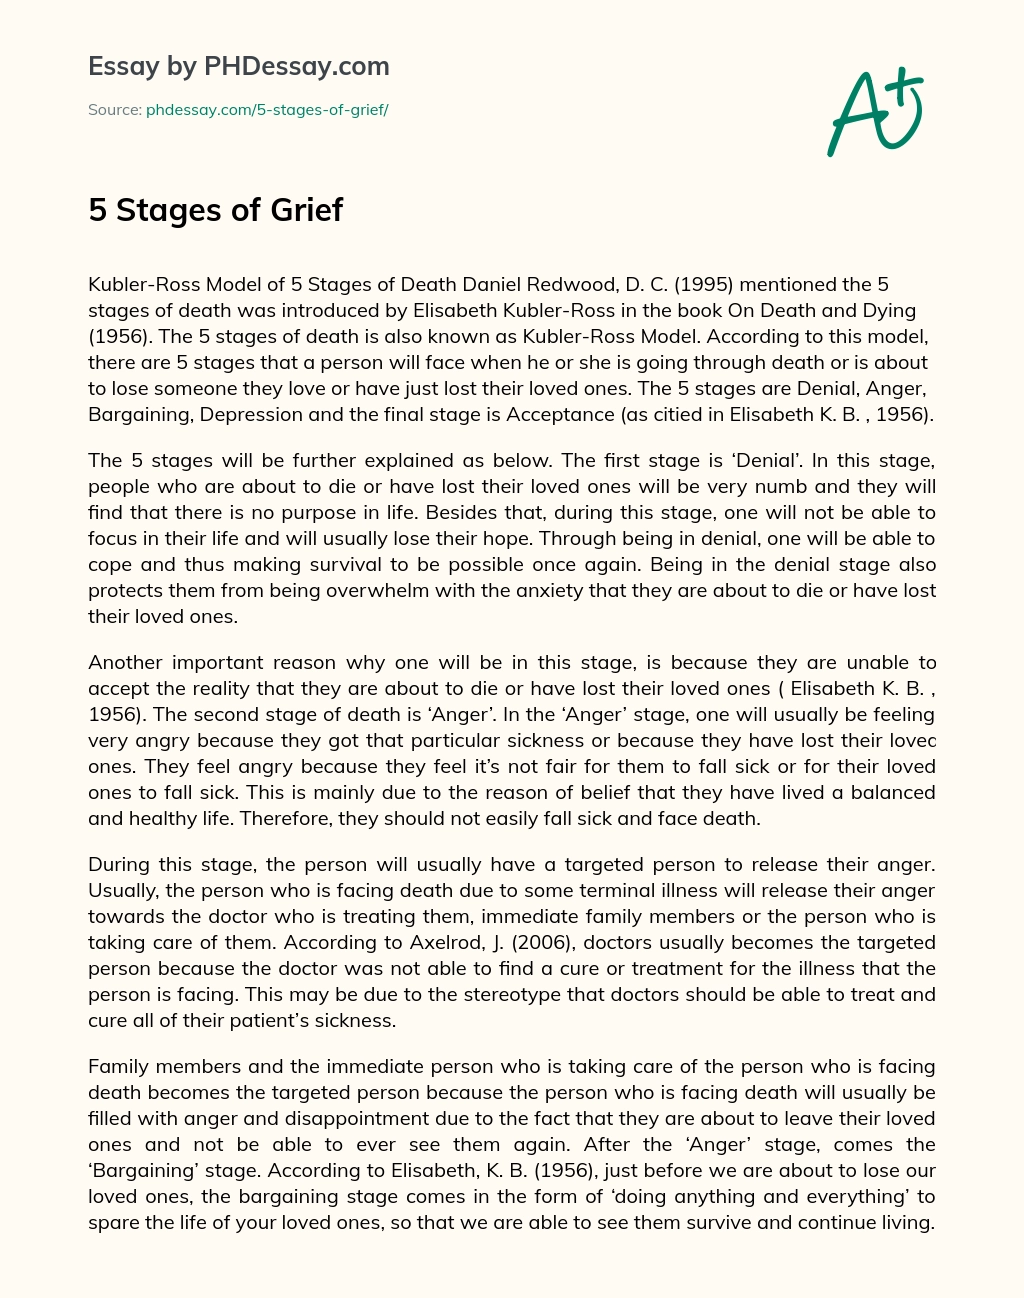 5 Stages of Grief essay